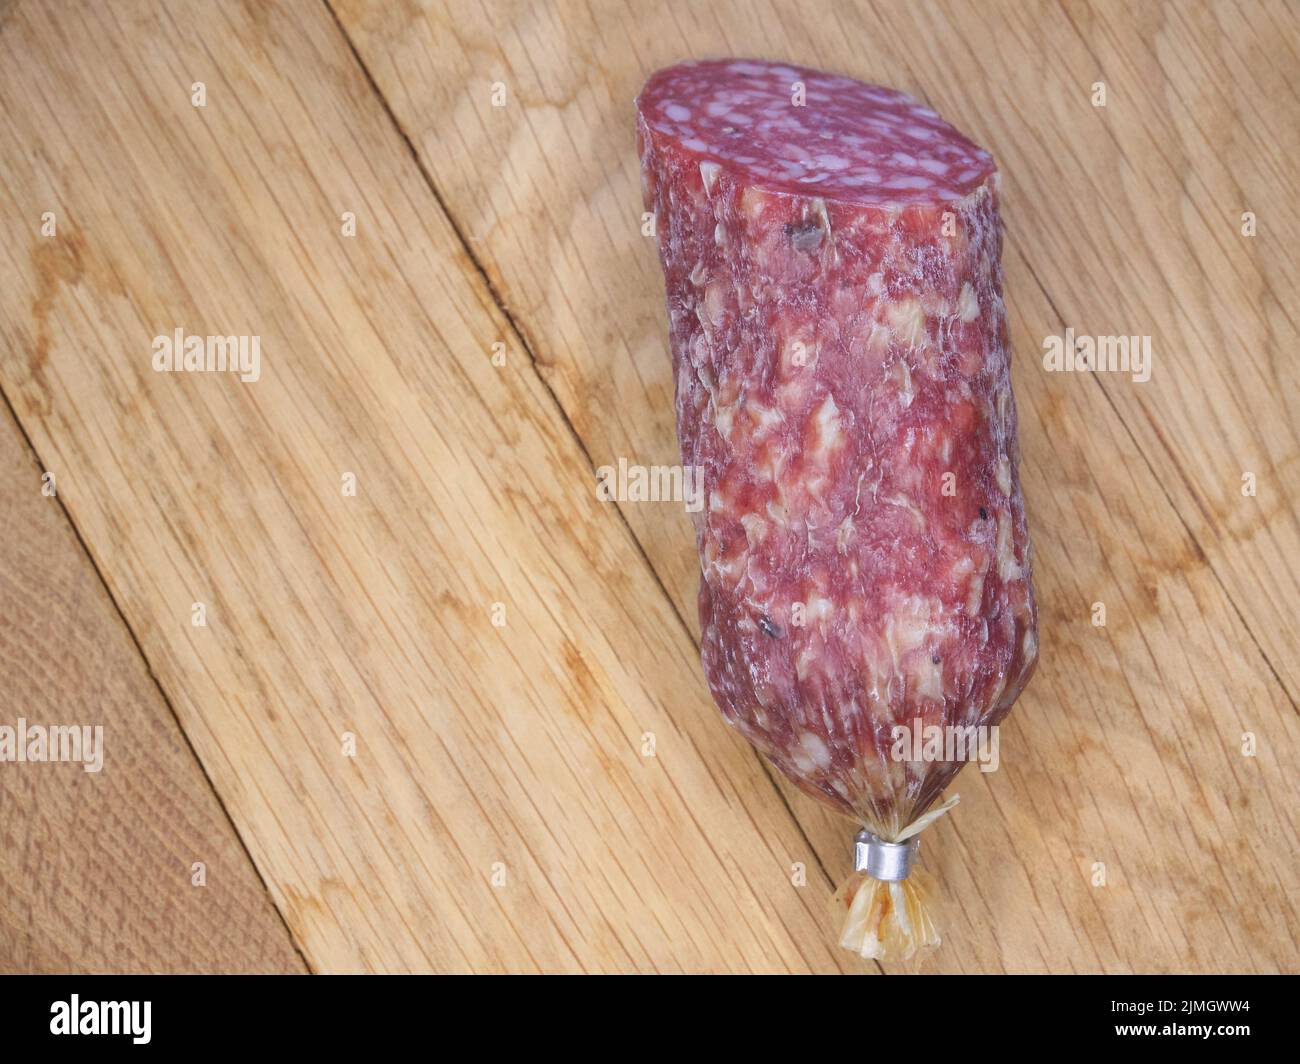 A large piece of smoked sausage on a wooden cutting board, close-up shot. Stock Photo